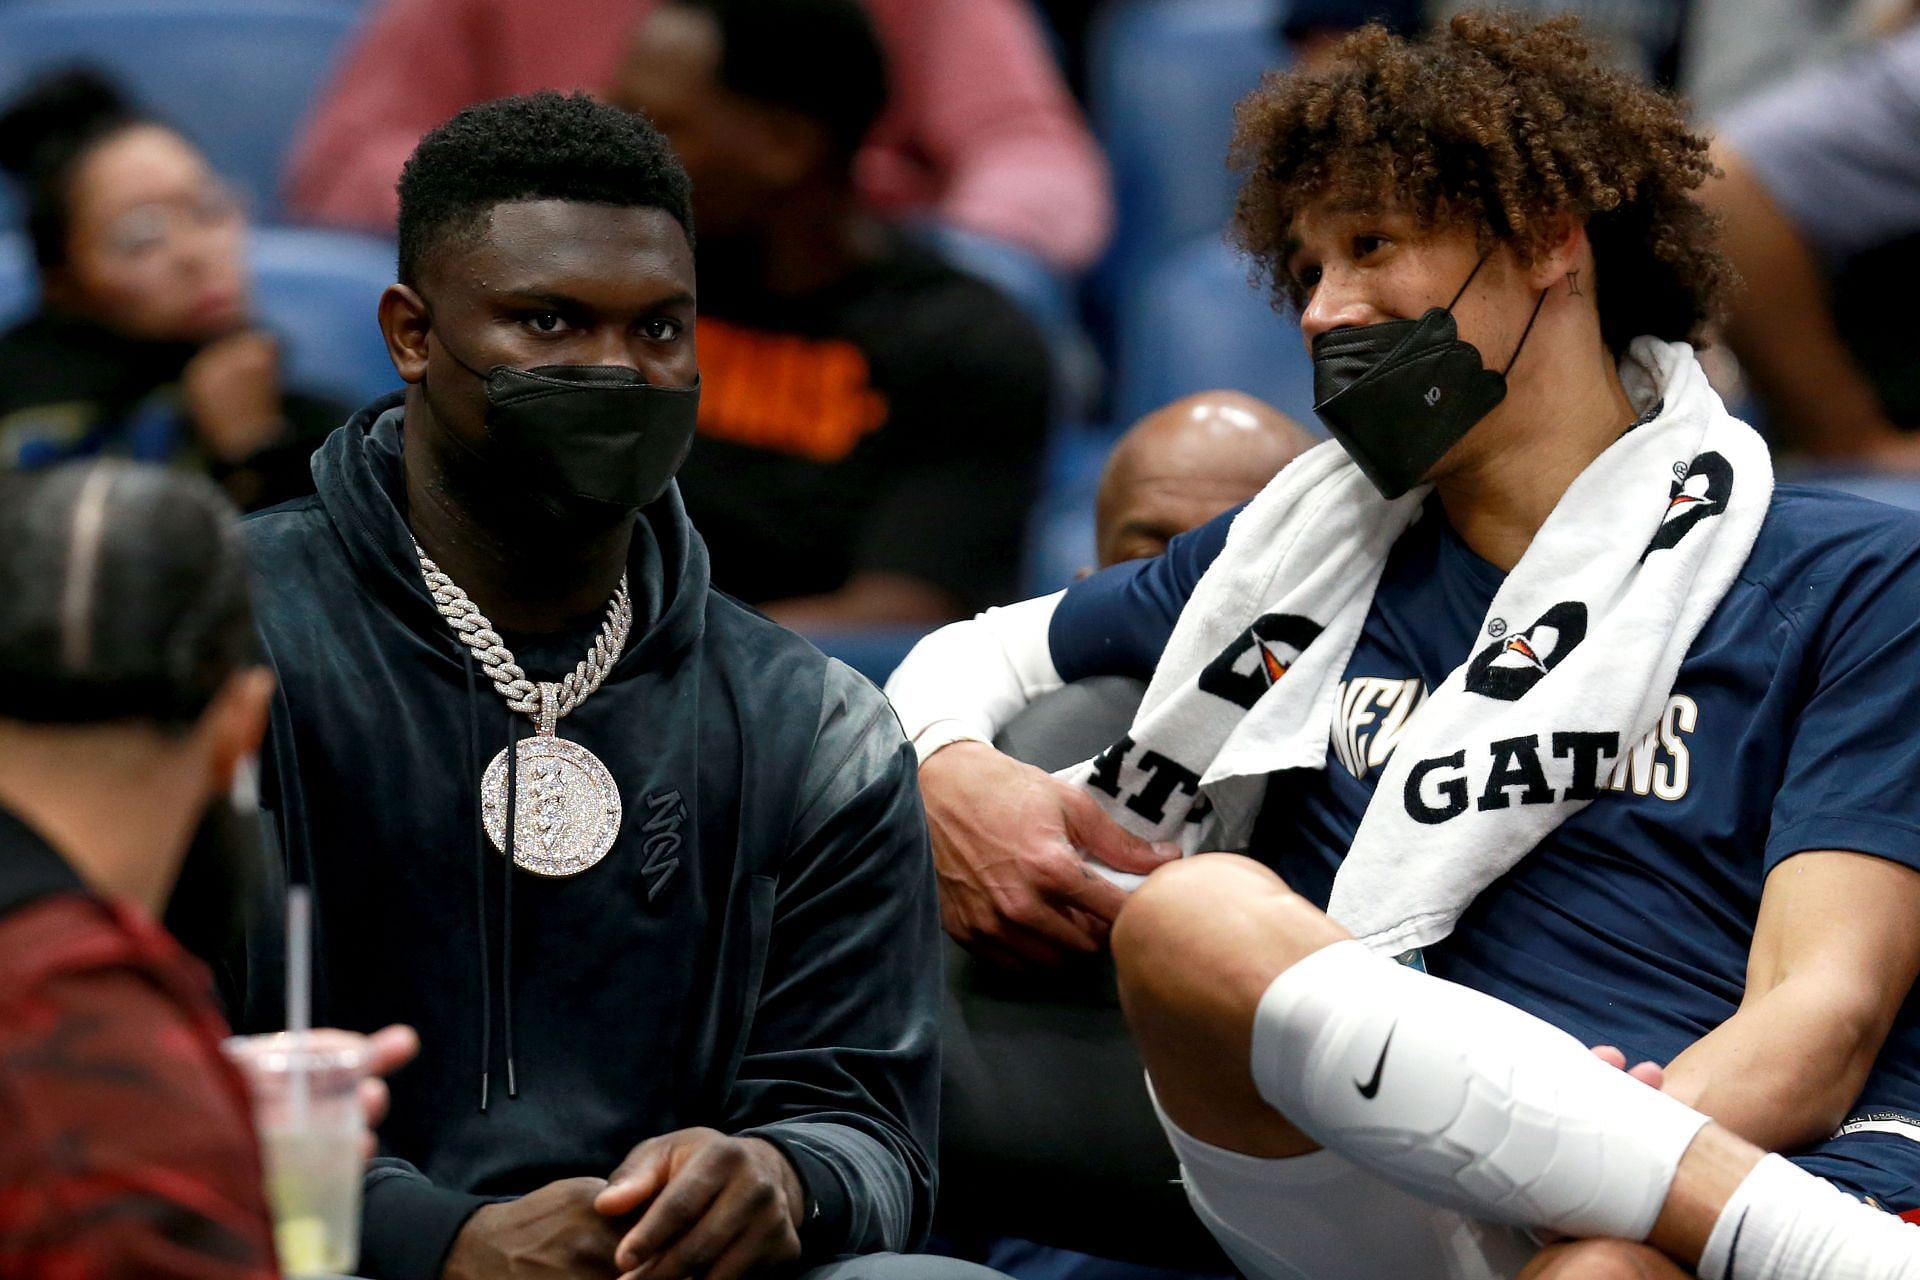 Zion Williamson and Jaxson Hayes of the New Orleans Pelicans on the bench.